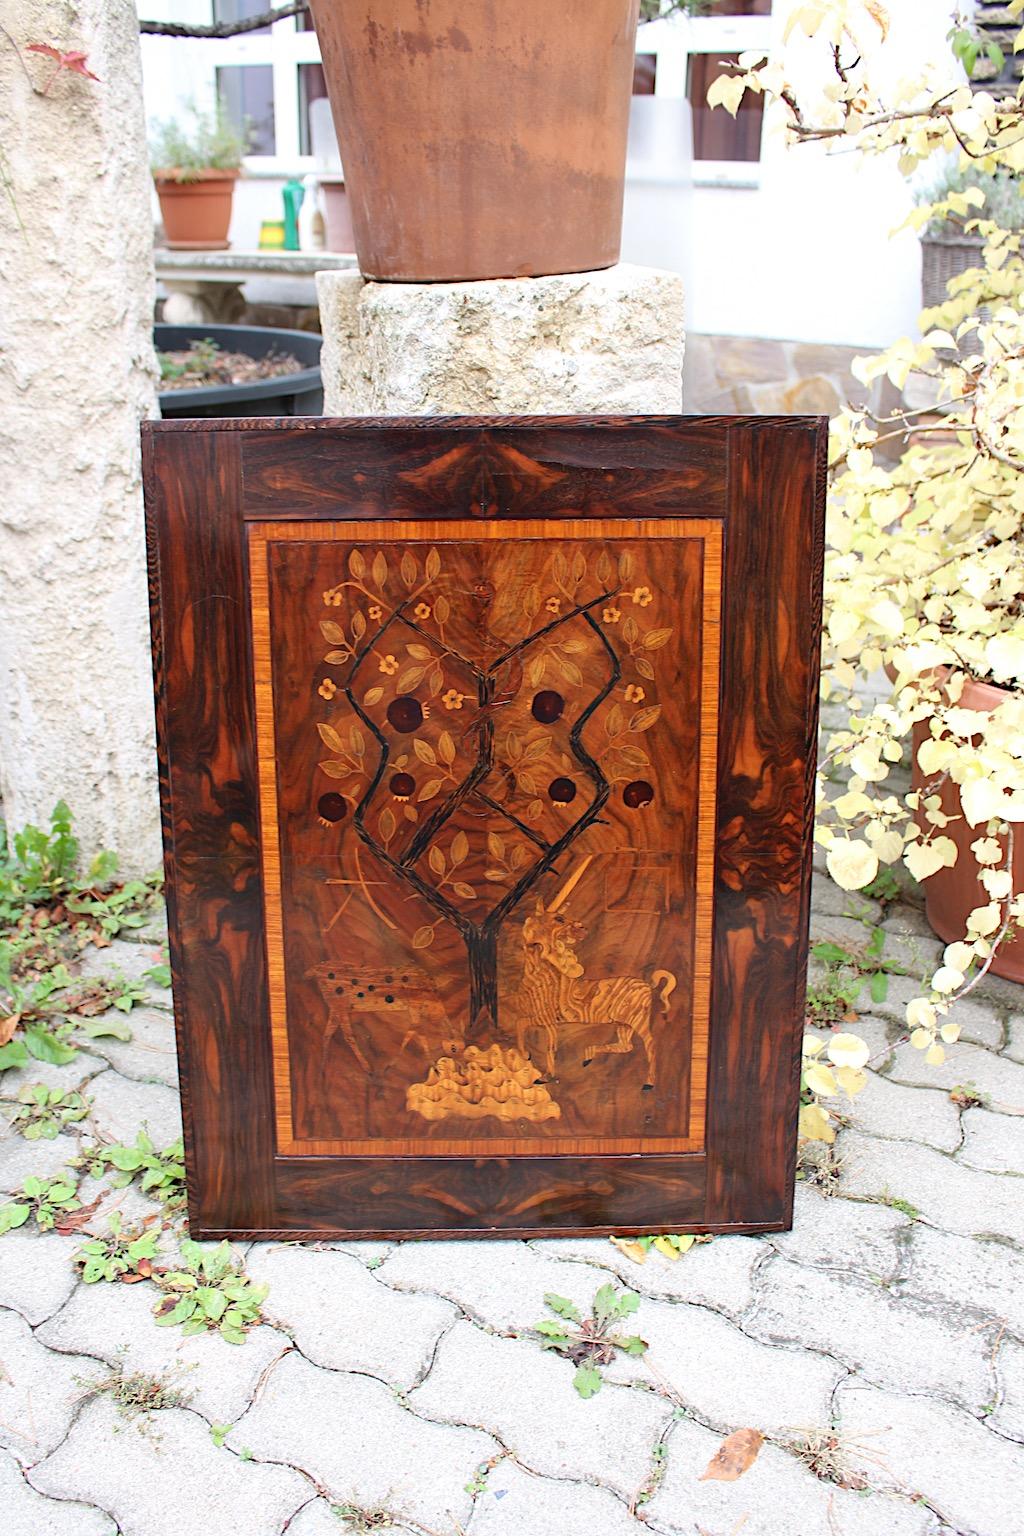 Early 20th Century Art Deco Wood Inlaid Picture Unicorn Pomegranate Tree 1920s Style Victor Lurje For Sale